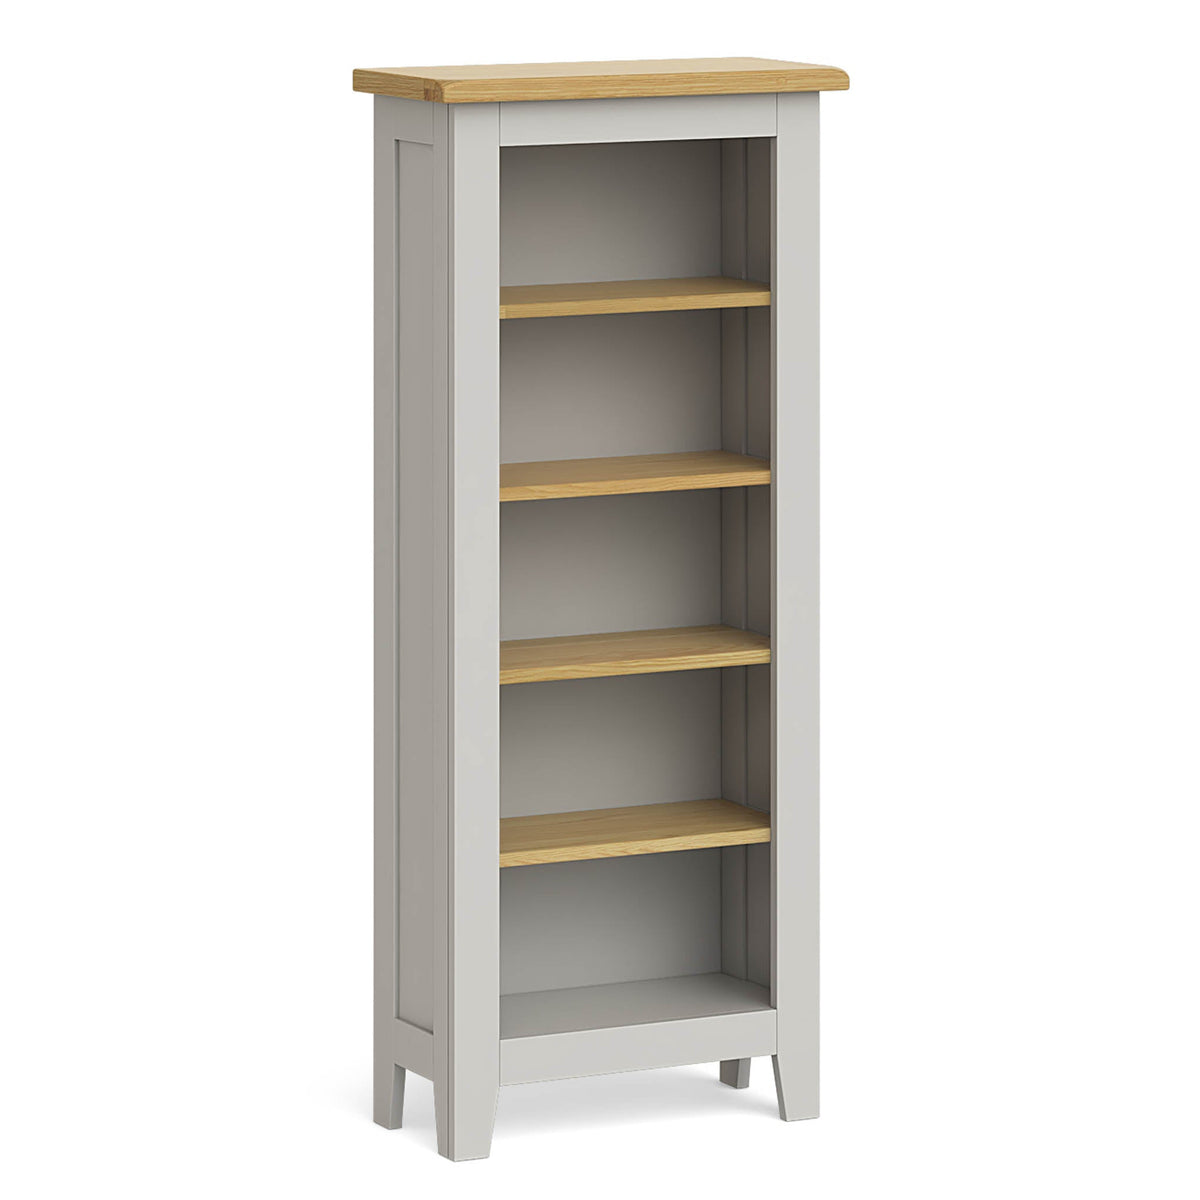 Lundy Grey Narrow Bookcase by Roseland Furniture